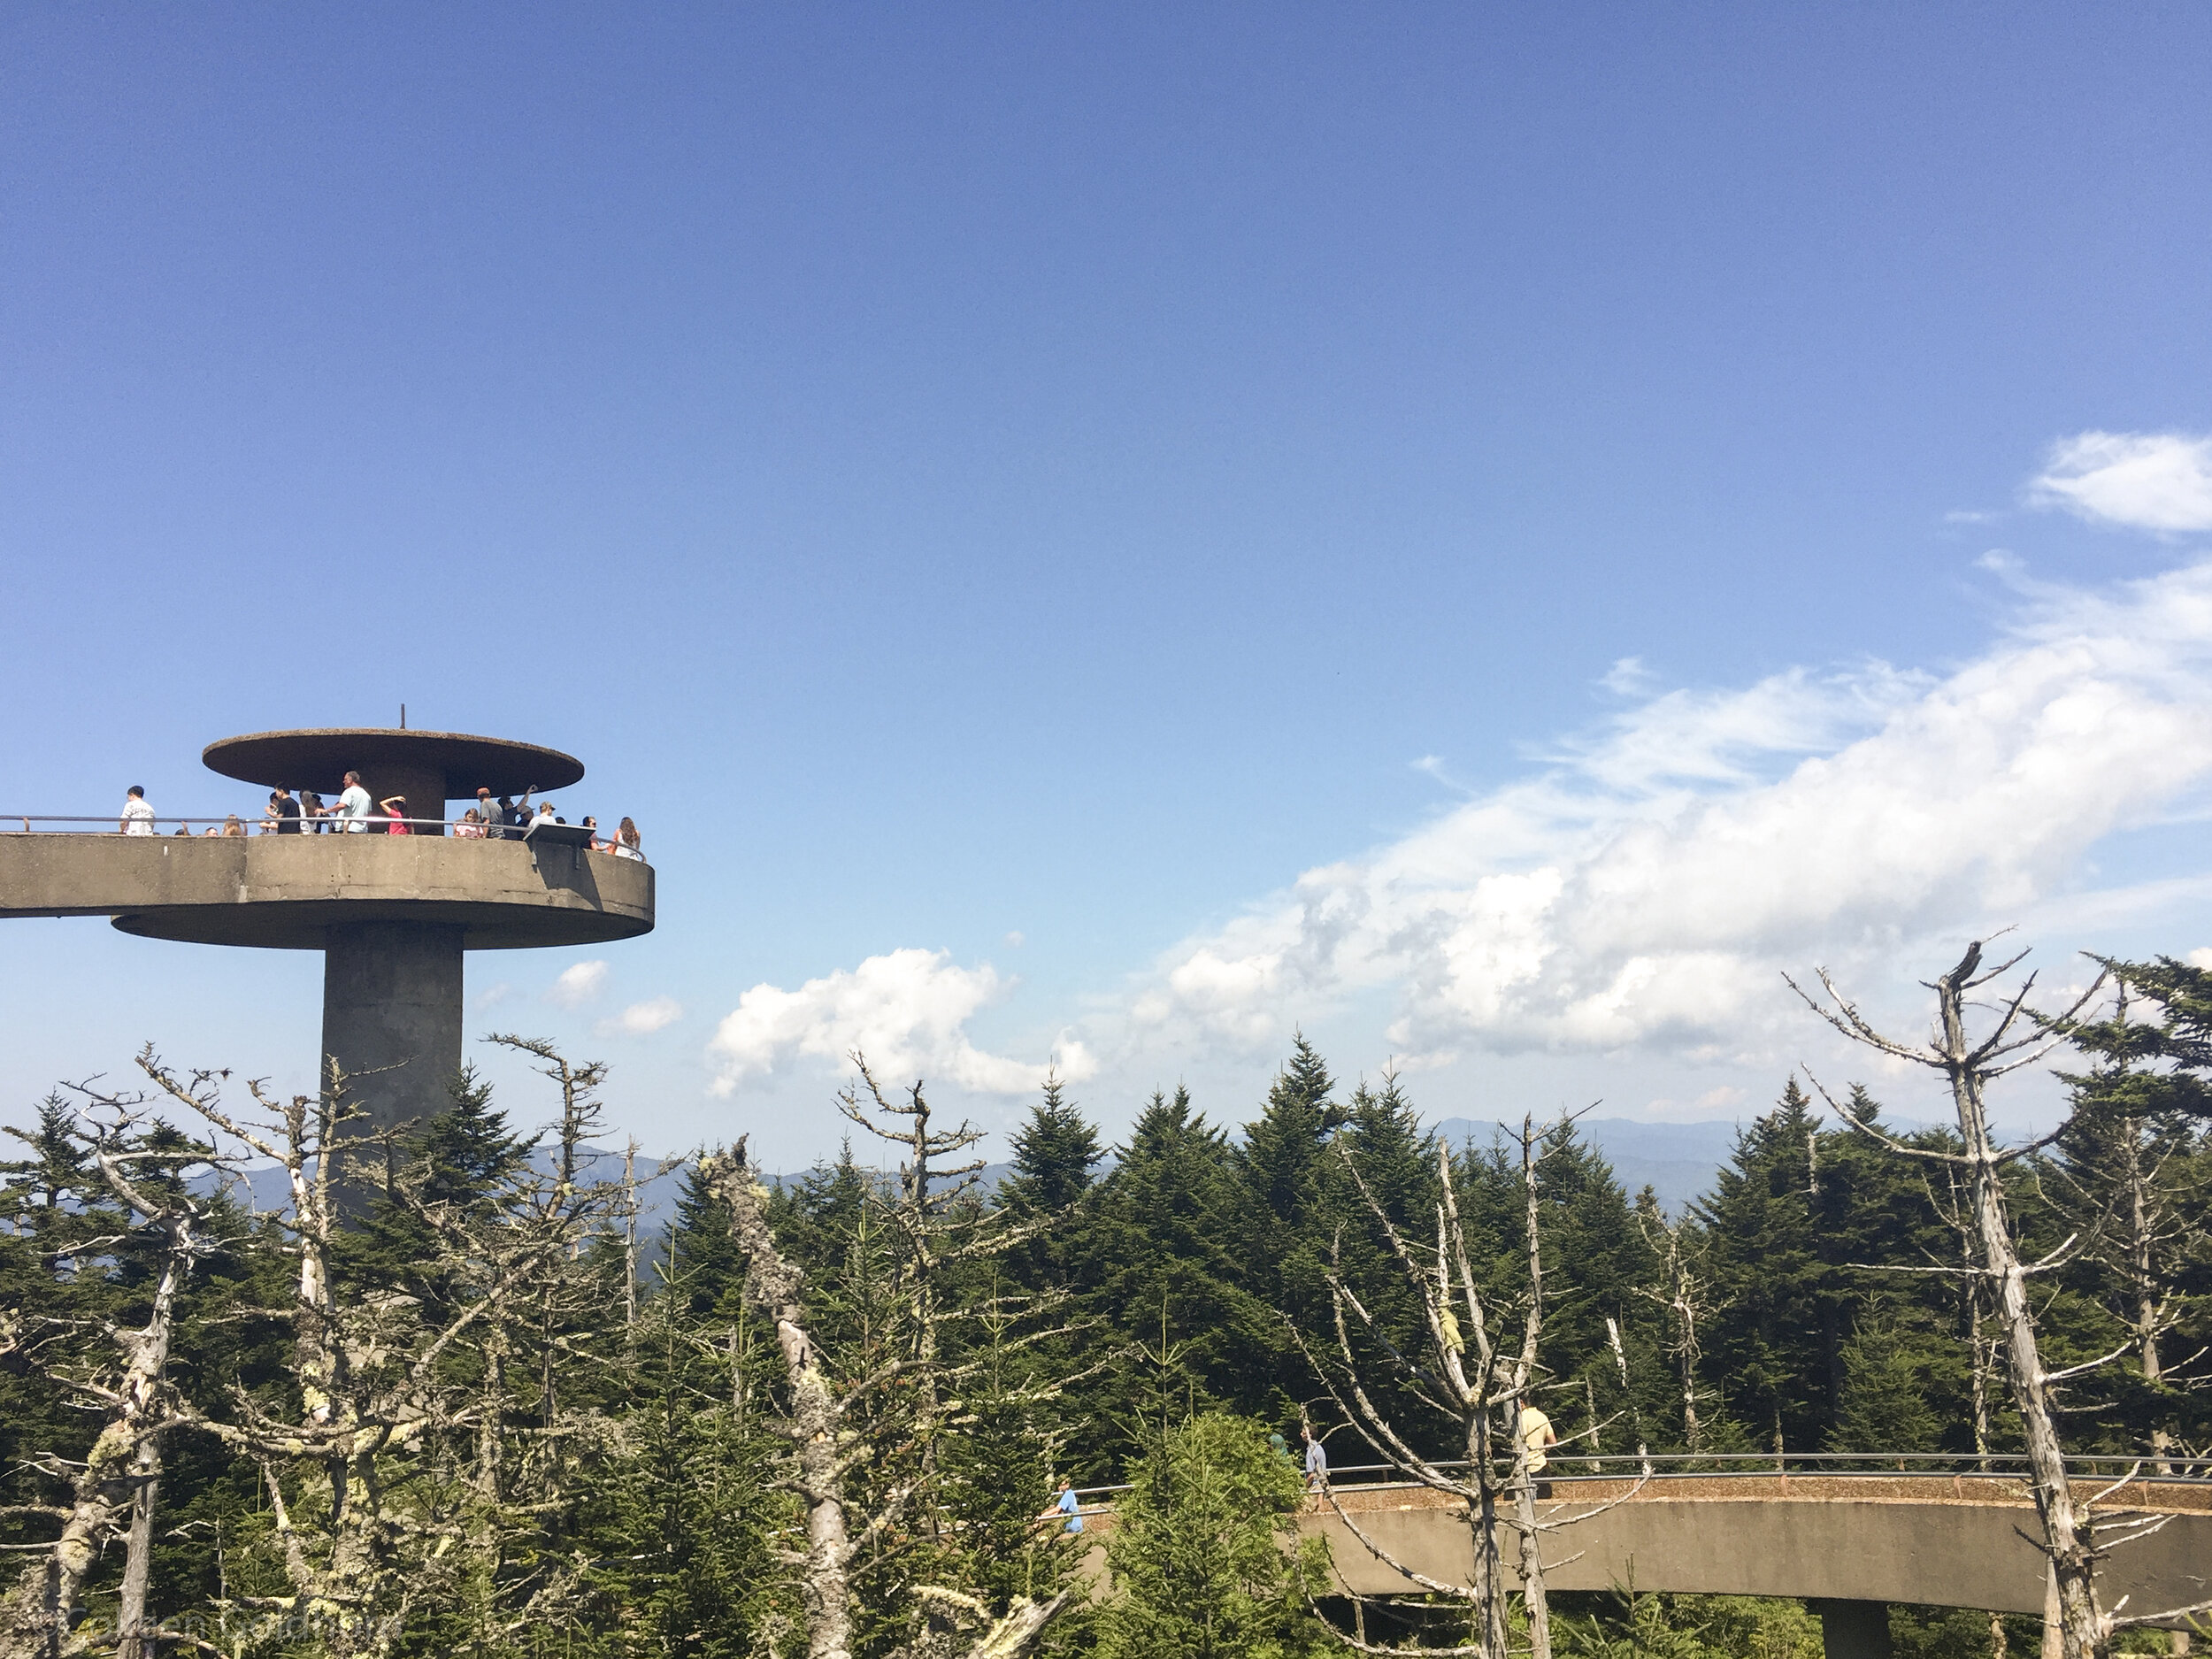 Clingman’s Dome, Great Smoky Mountains, Tennessee